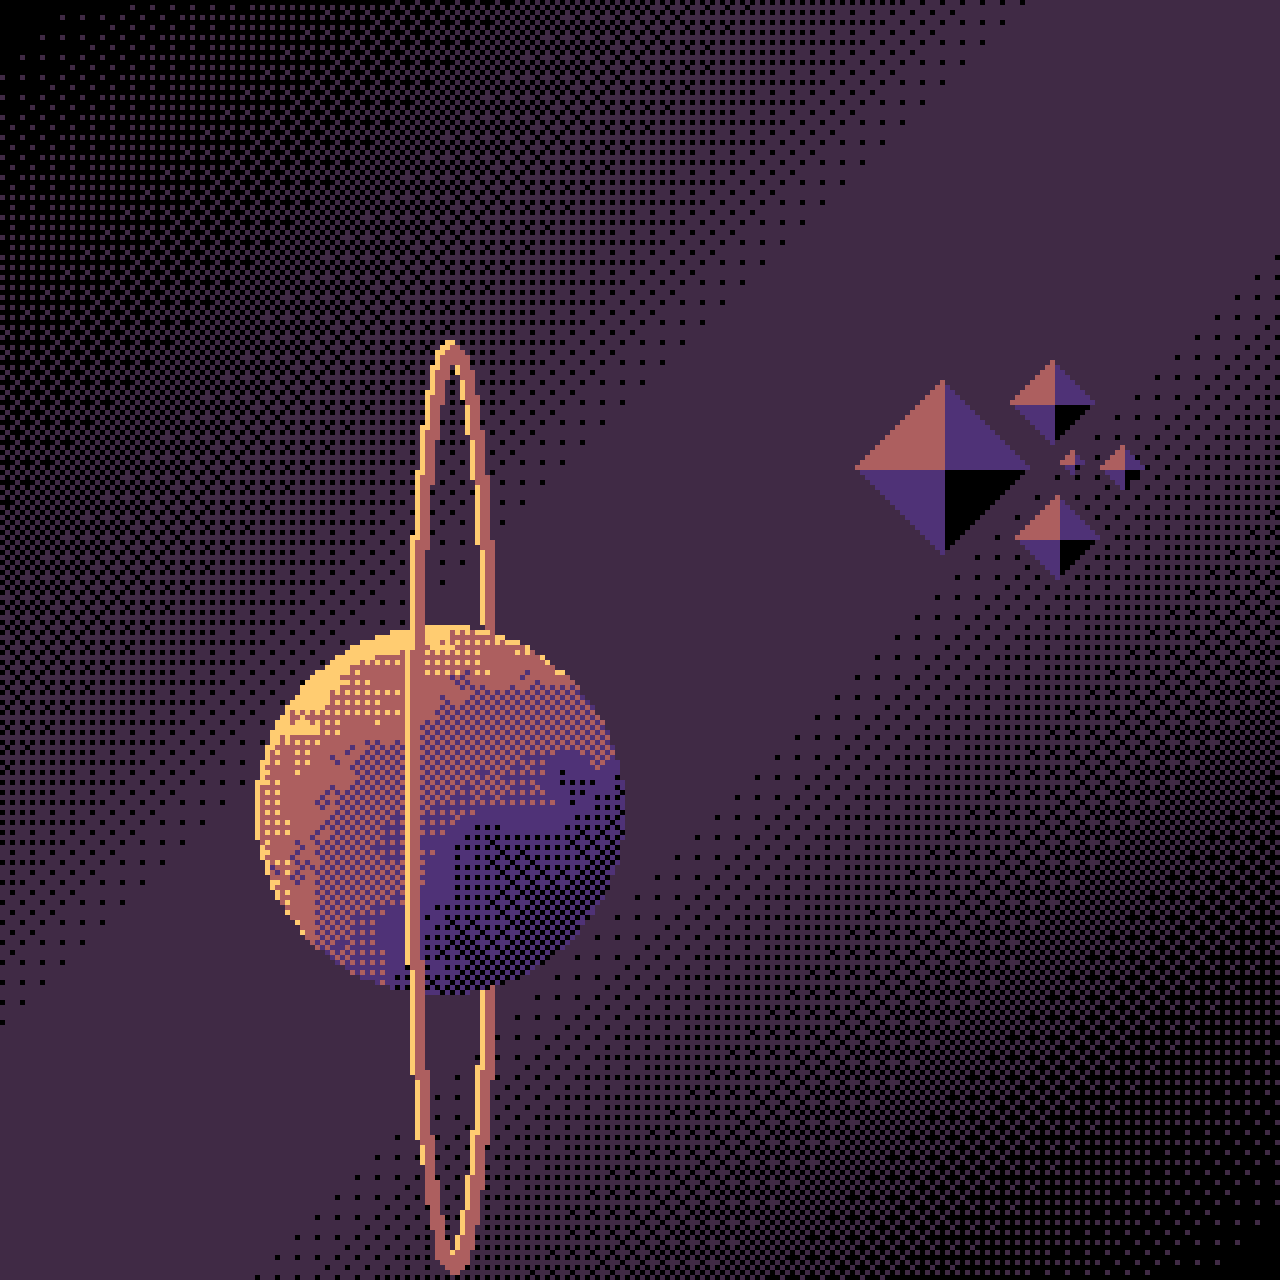 Space scenery